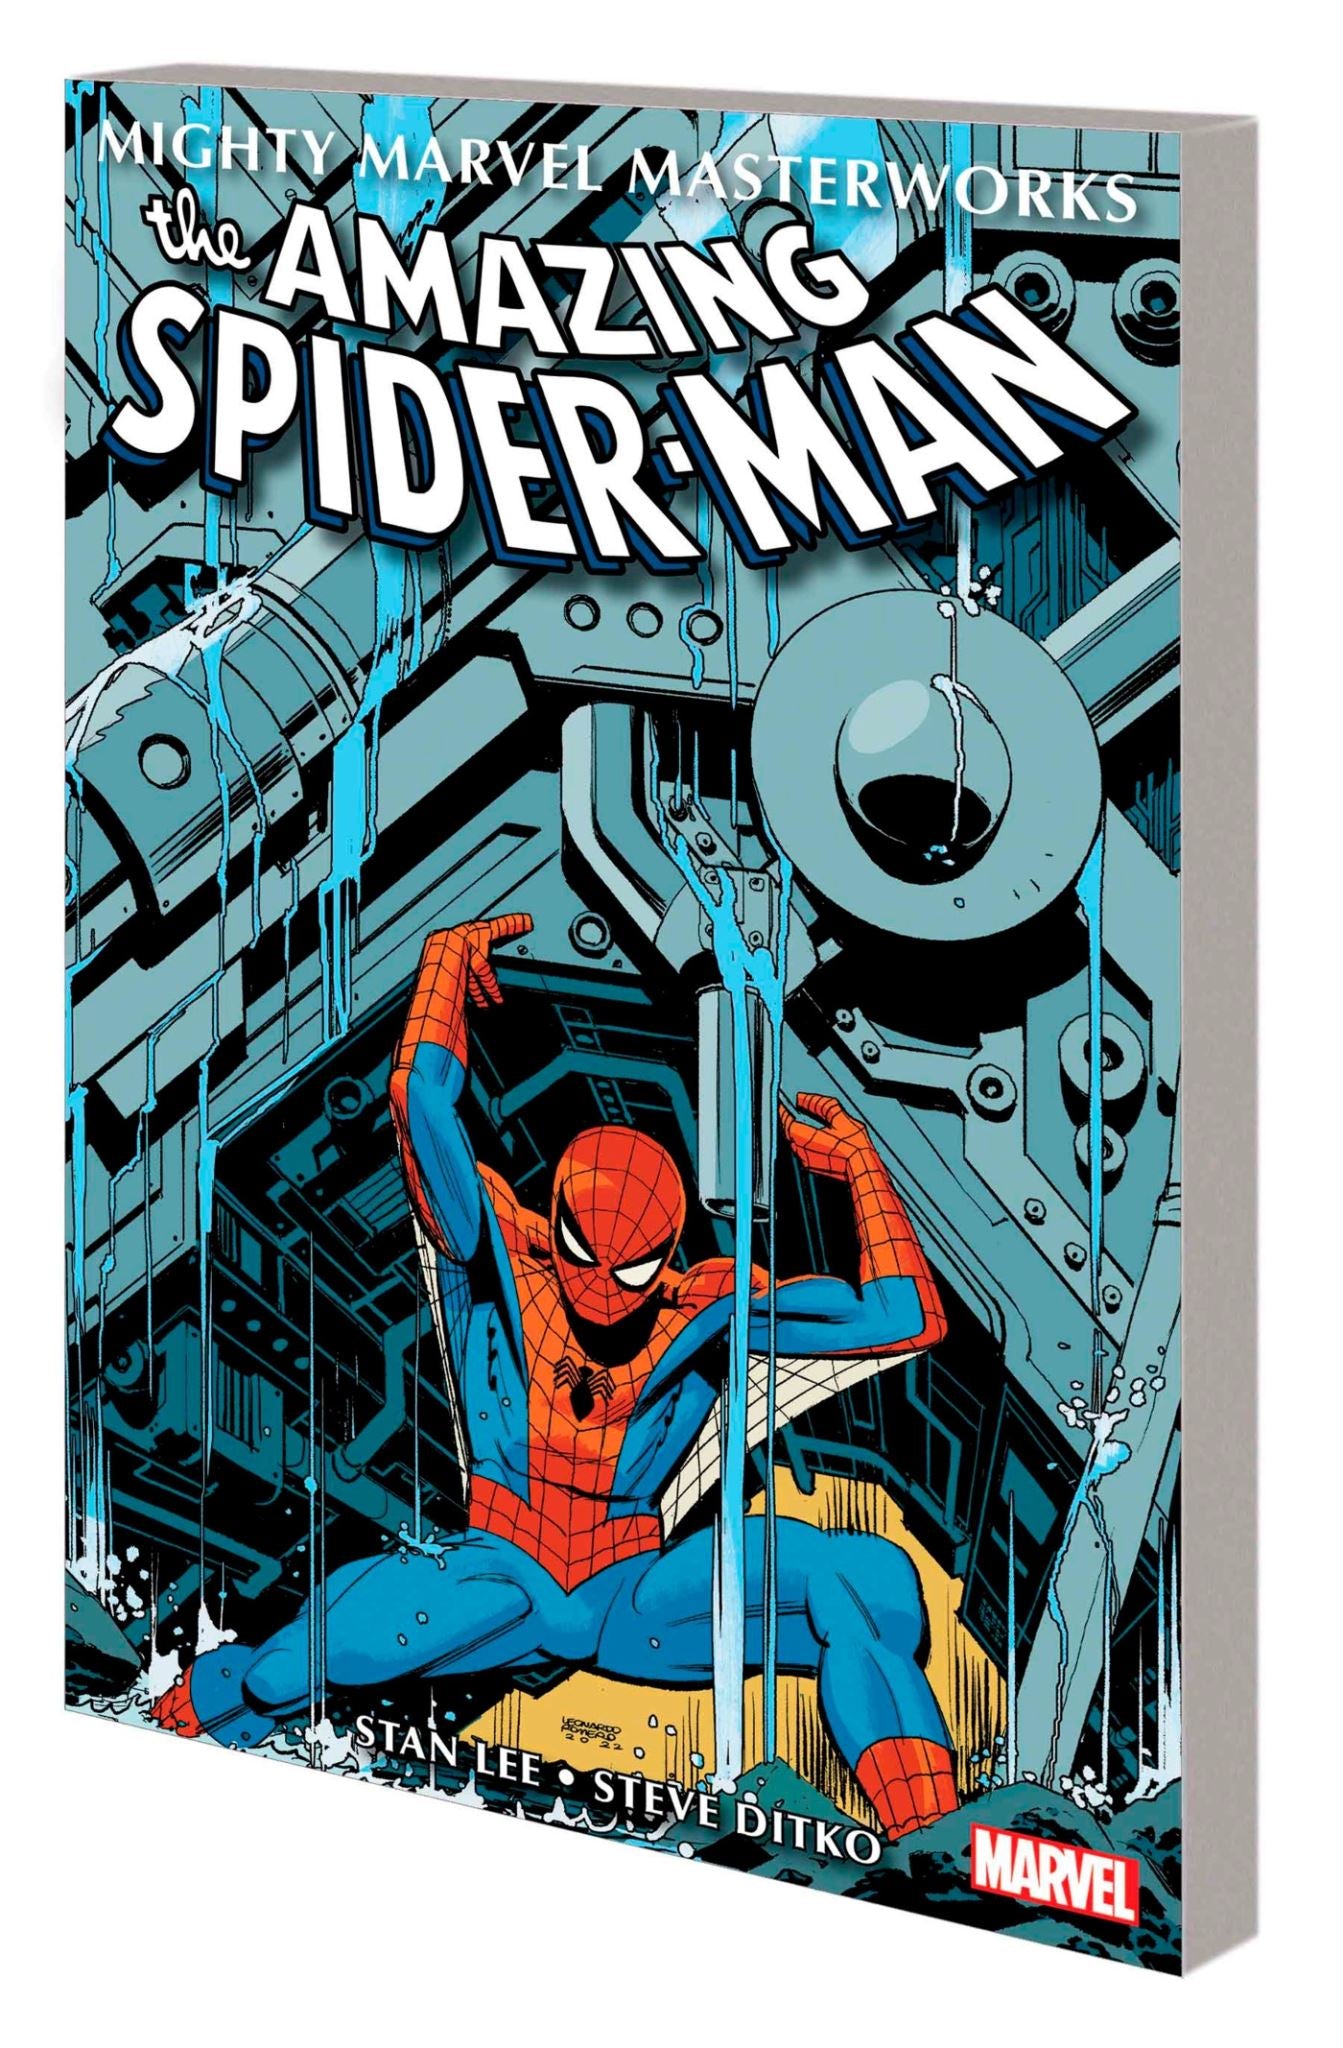 MIGHTY MARVEL MASTERWORKS  THE AMAZING SPIDER-MAN VOL. 4 - THE MASTER PLANNER